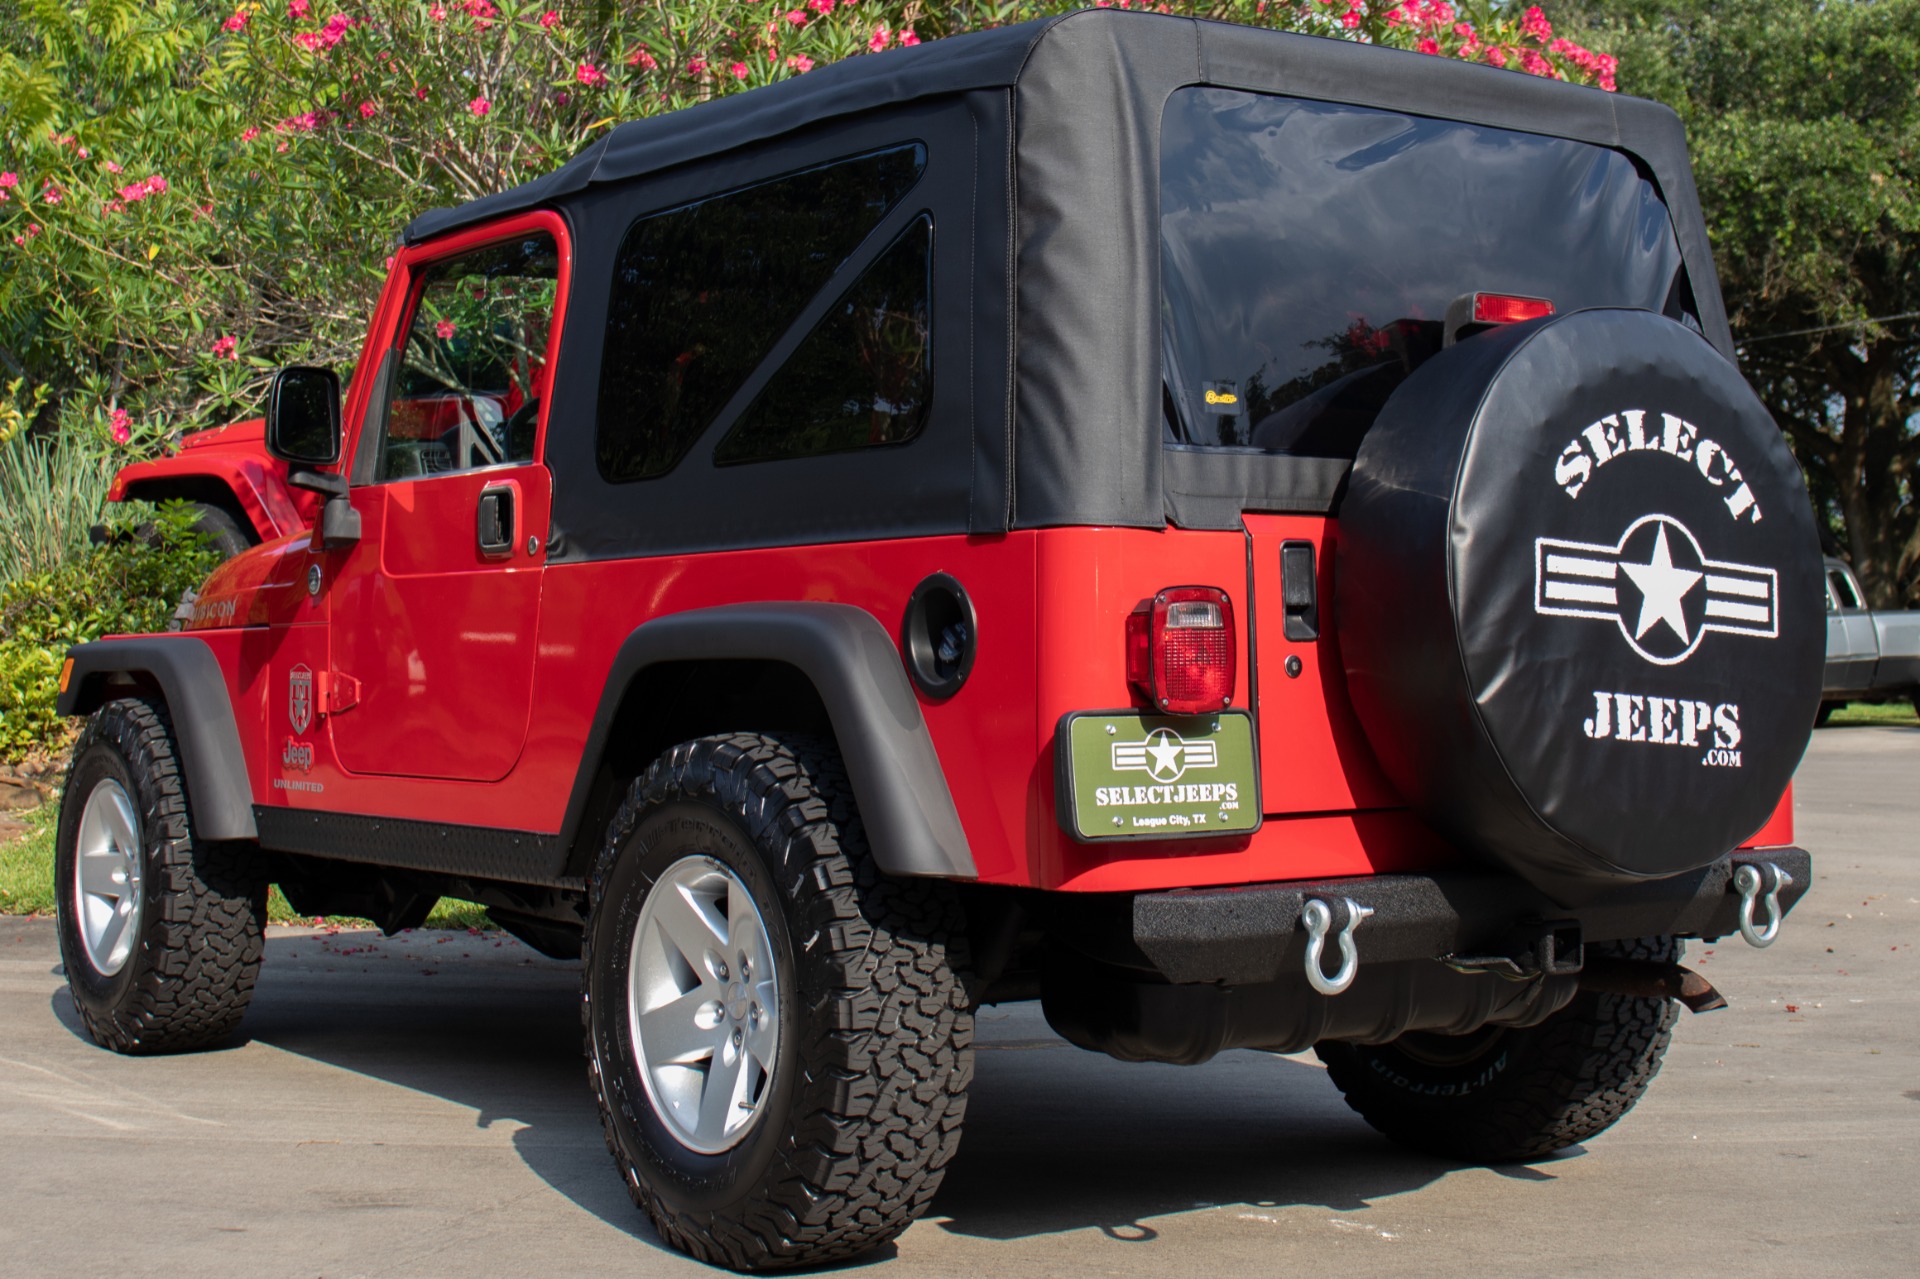 Used-2005-Jeep-Wrangler-Unlimited-Rubicon